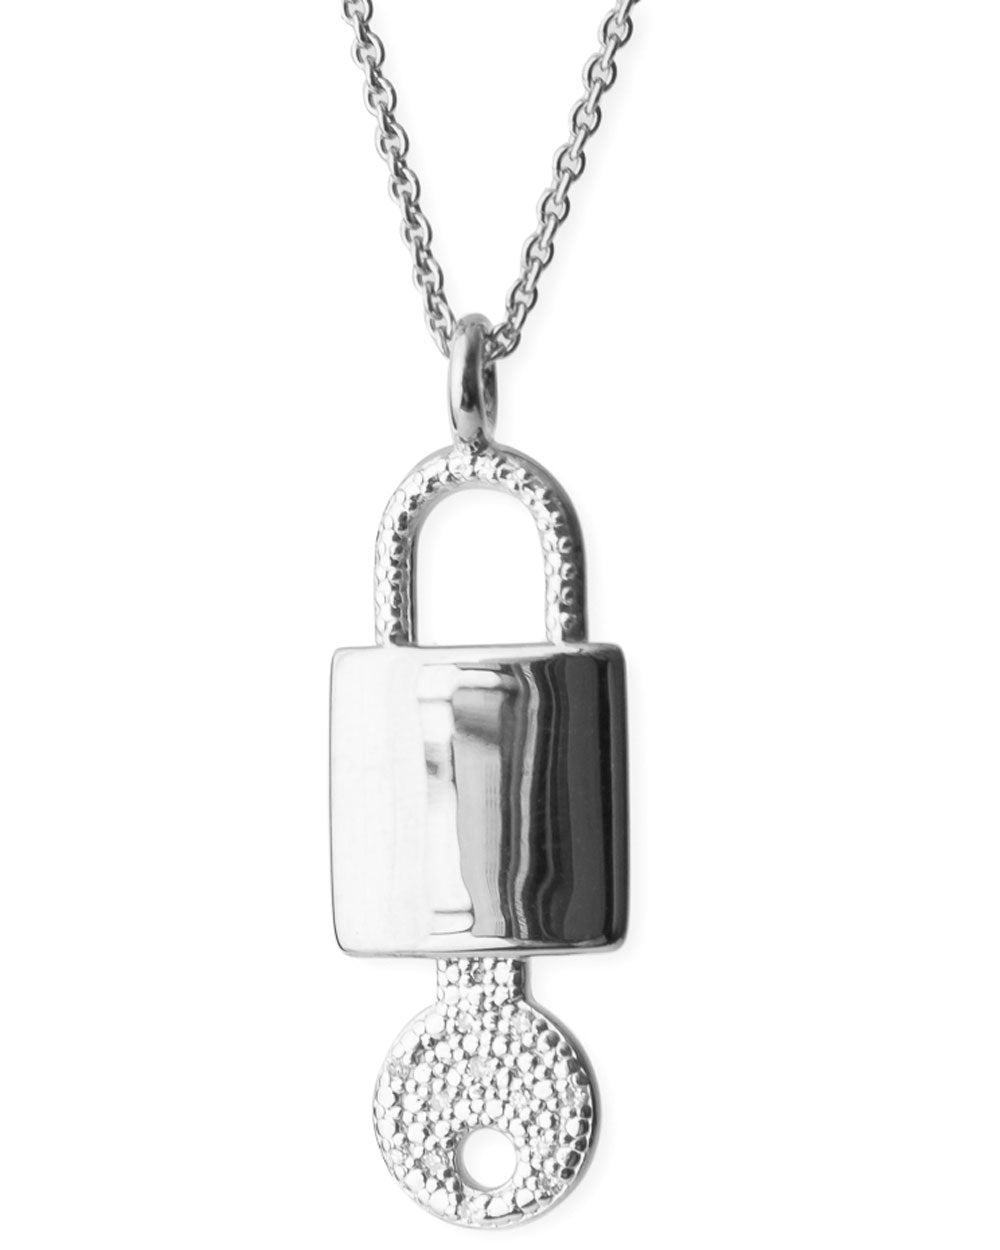 Padlock Pendant Necklace in Sterling Silver, Silver Pad Lock